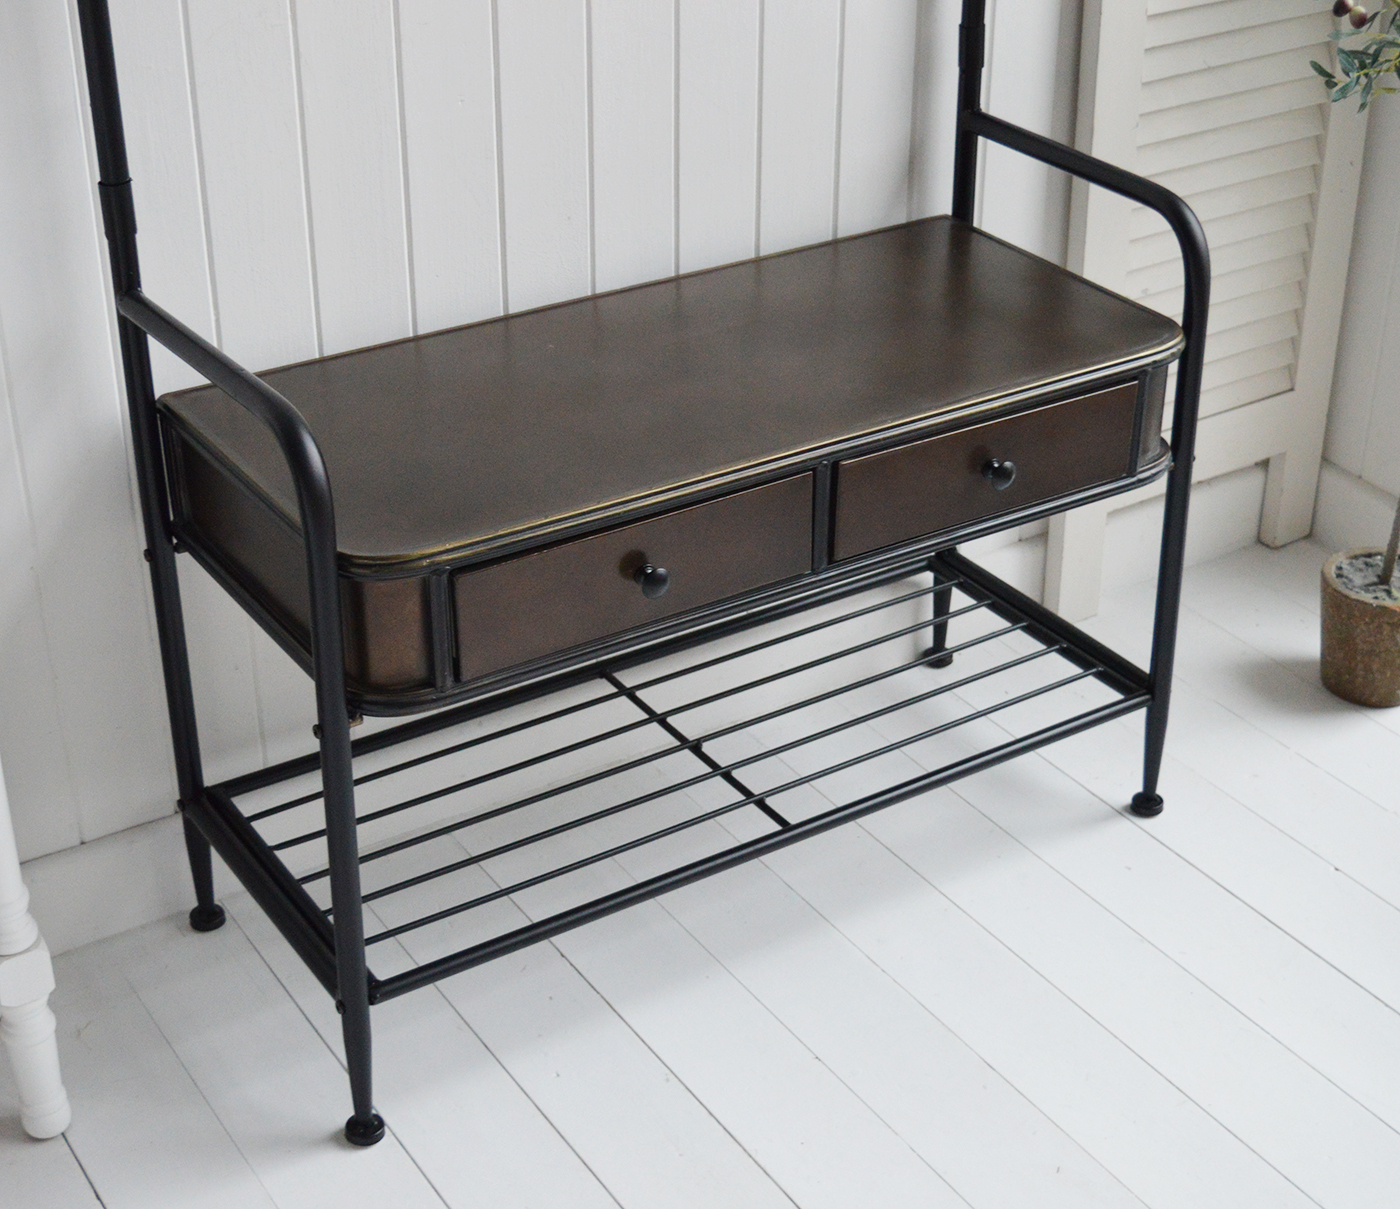 Windsor Hallway Stand - Bench Seat, shelf and Coat Rack for complete Hall Entry Way in antiqued black metal for modern farmhouse, coastal and country New England Interiors . Photo shows the drawers and colour